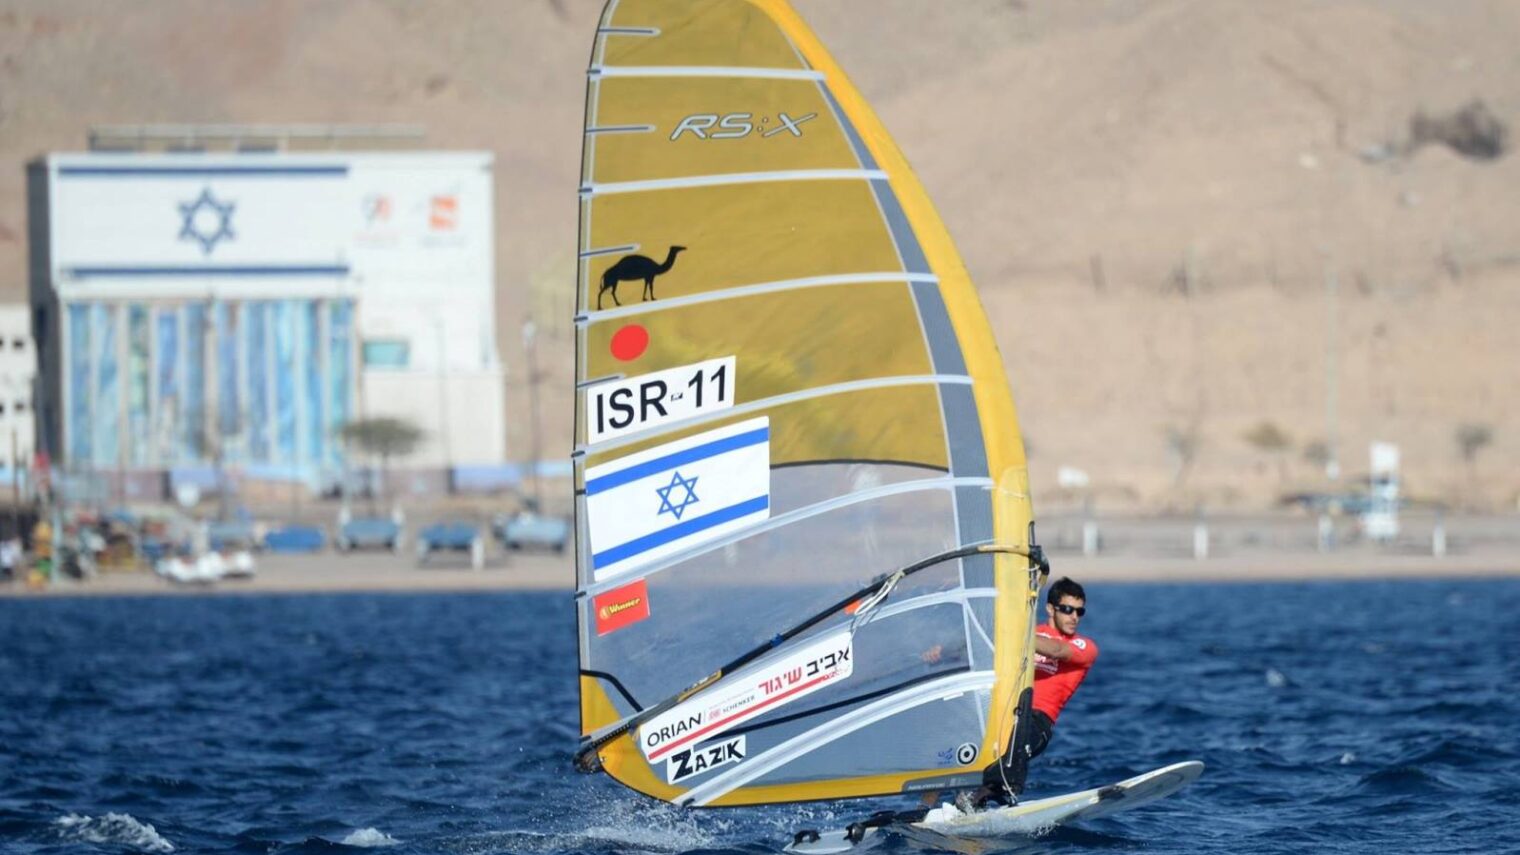 Olympic bronze medalist Shahar Zubari won a berth at Rio on the strength of his finish in this windsurfing competition last April in Palma de Mallorca. Photo via Facebook